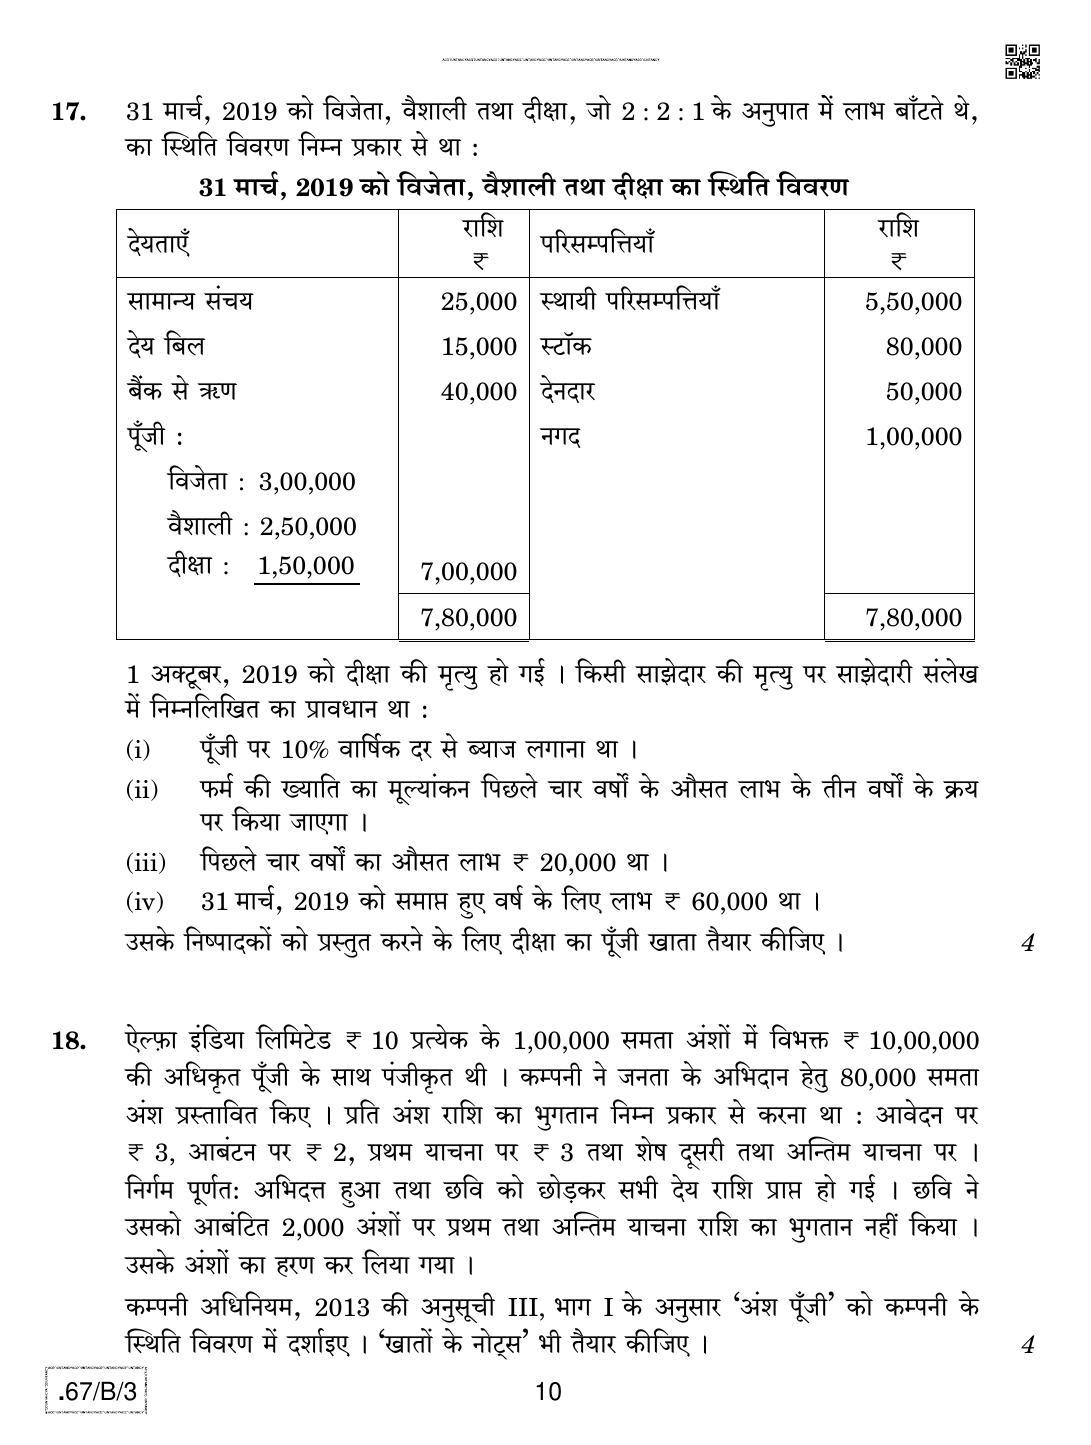 CBSE Class 12 67-C-3 - Accountancy 2020 Compartment Question Paper - Page 10